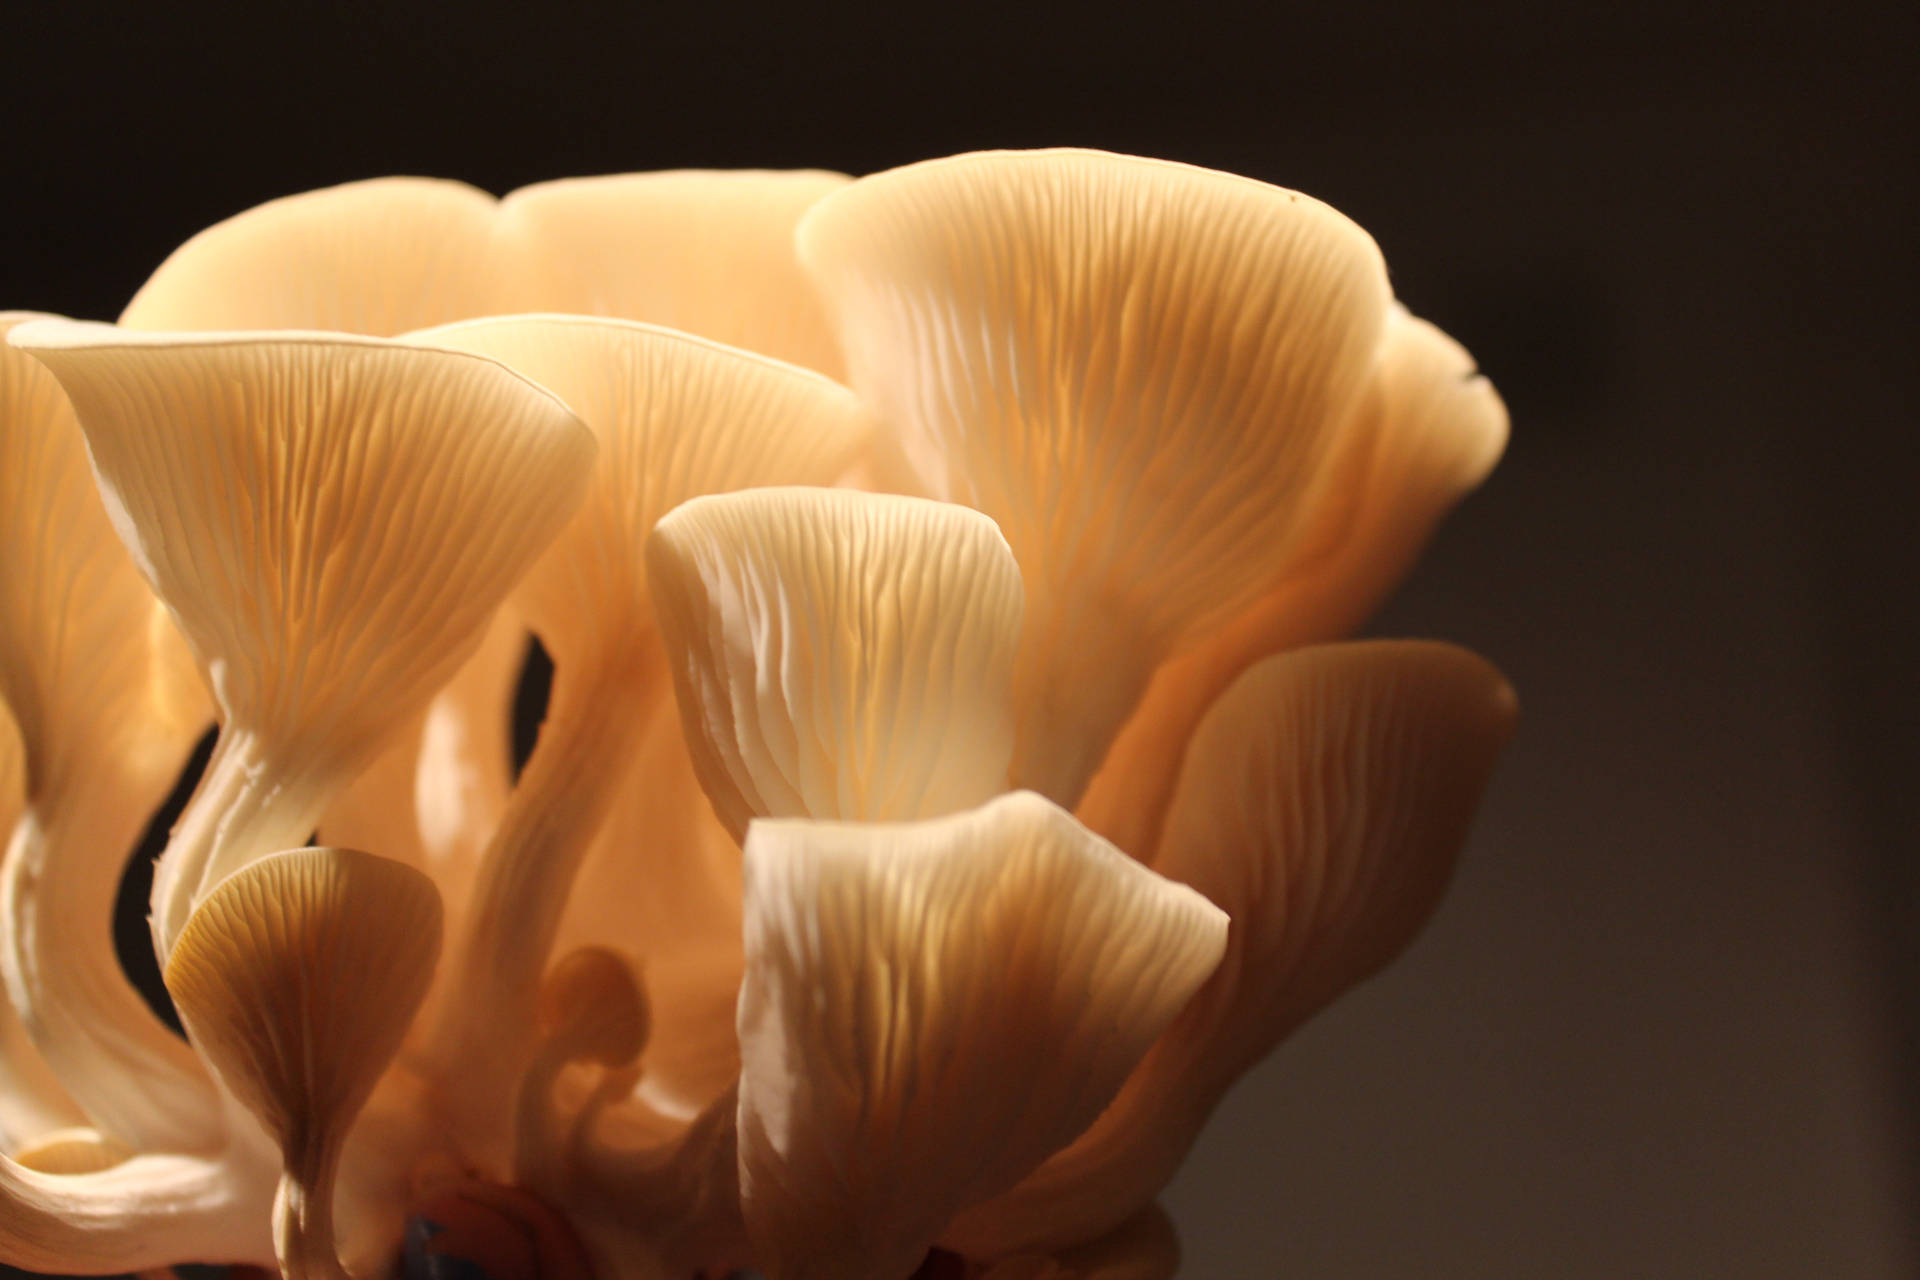 Mushroom 5184X3456 Wallpaper and Background Image